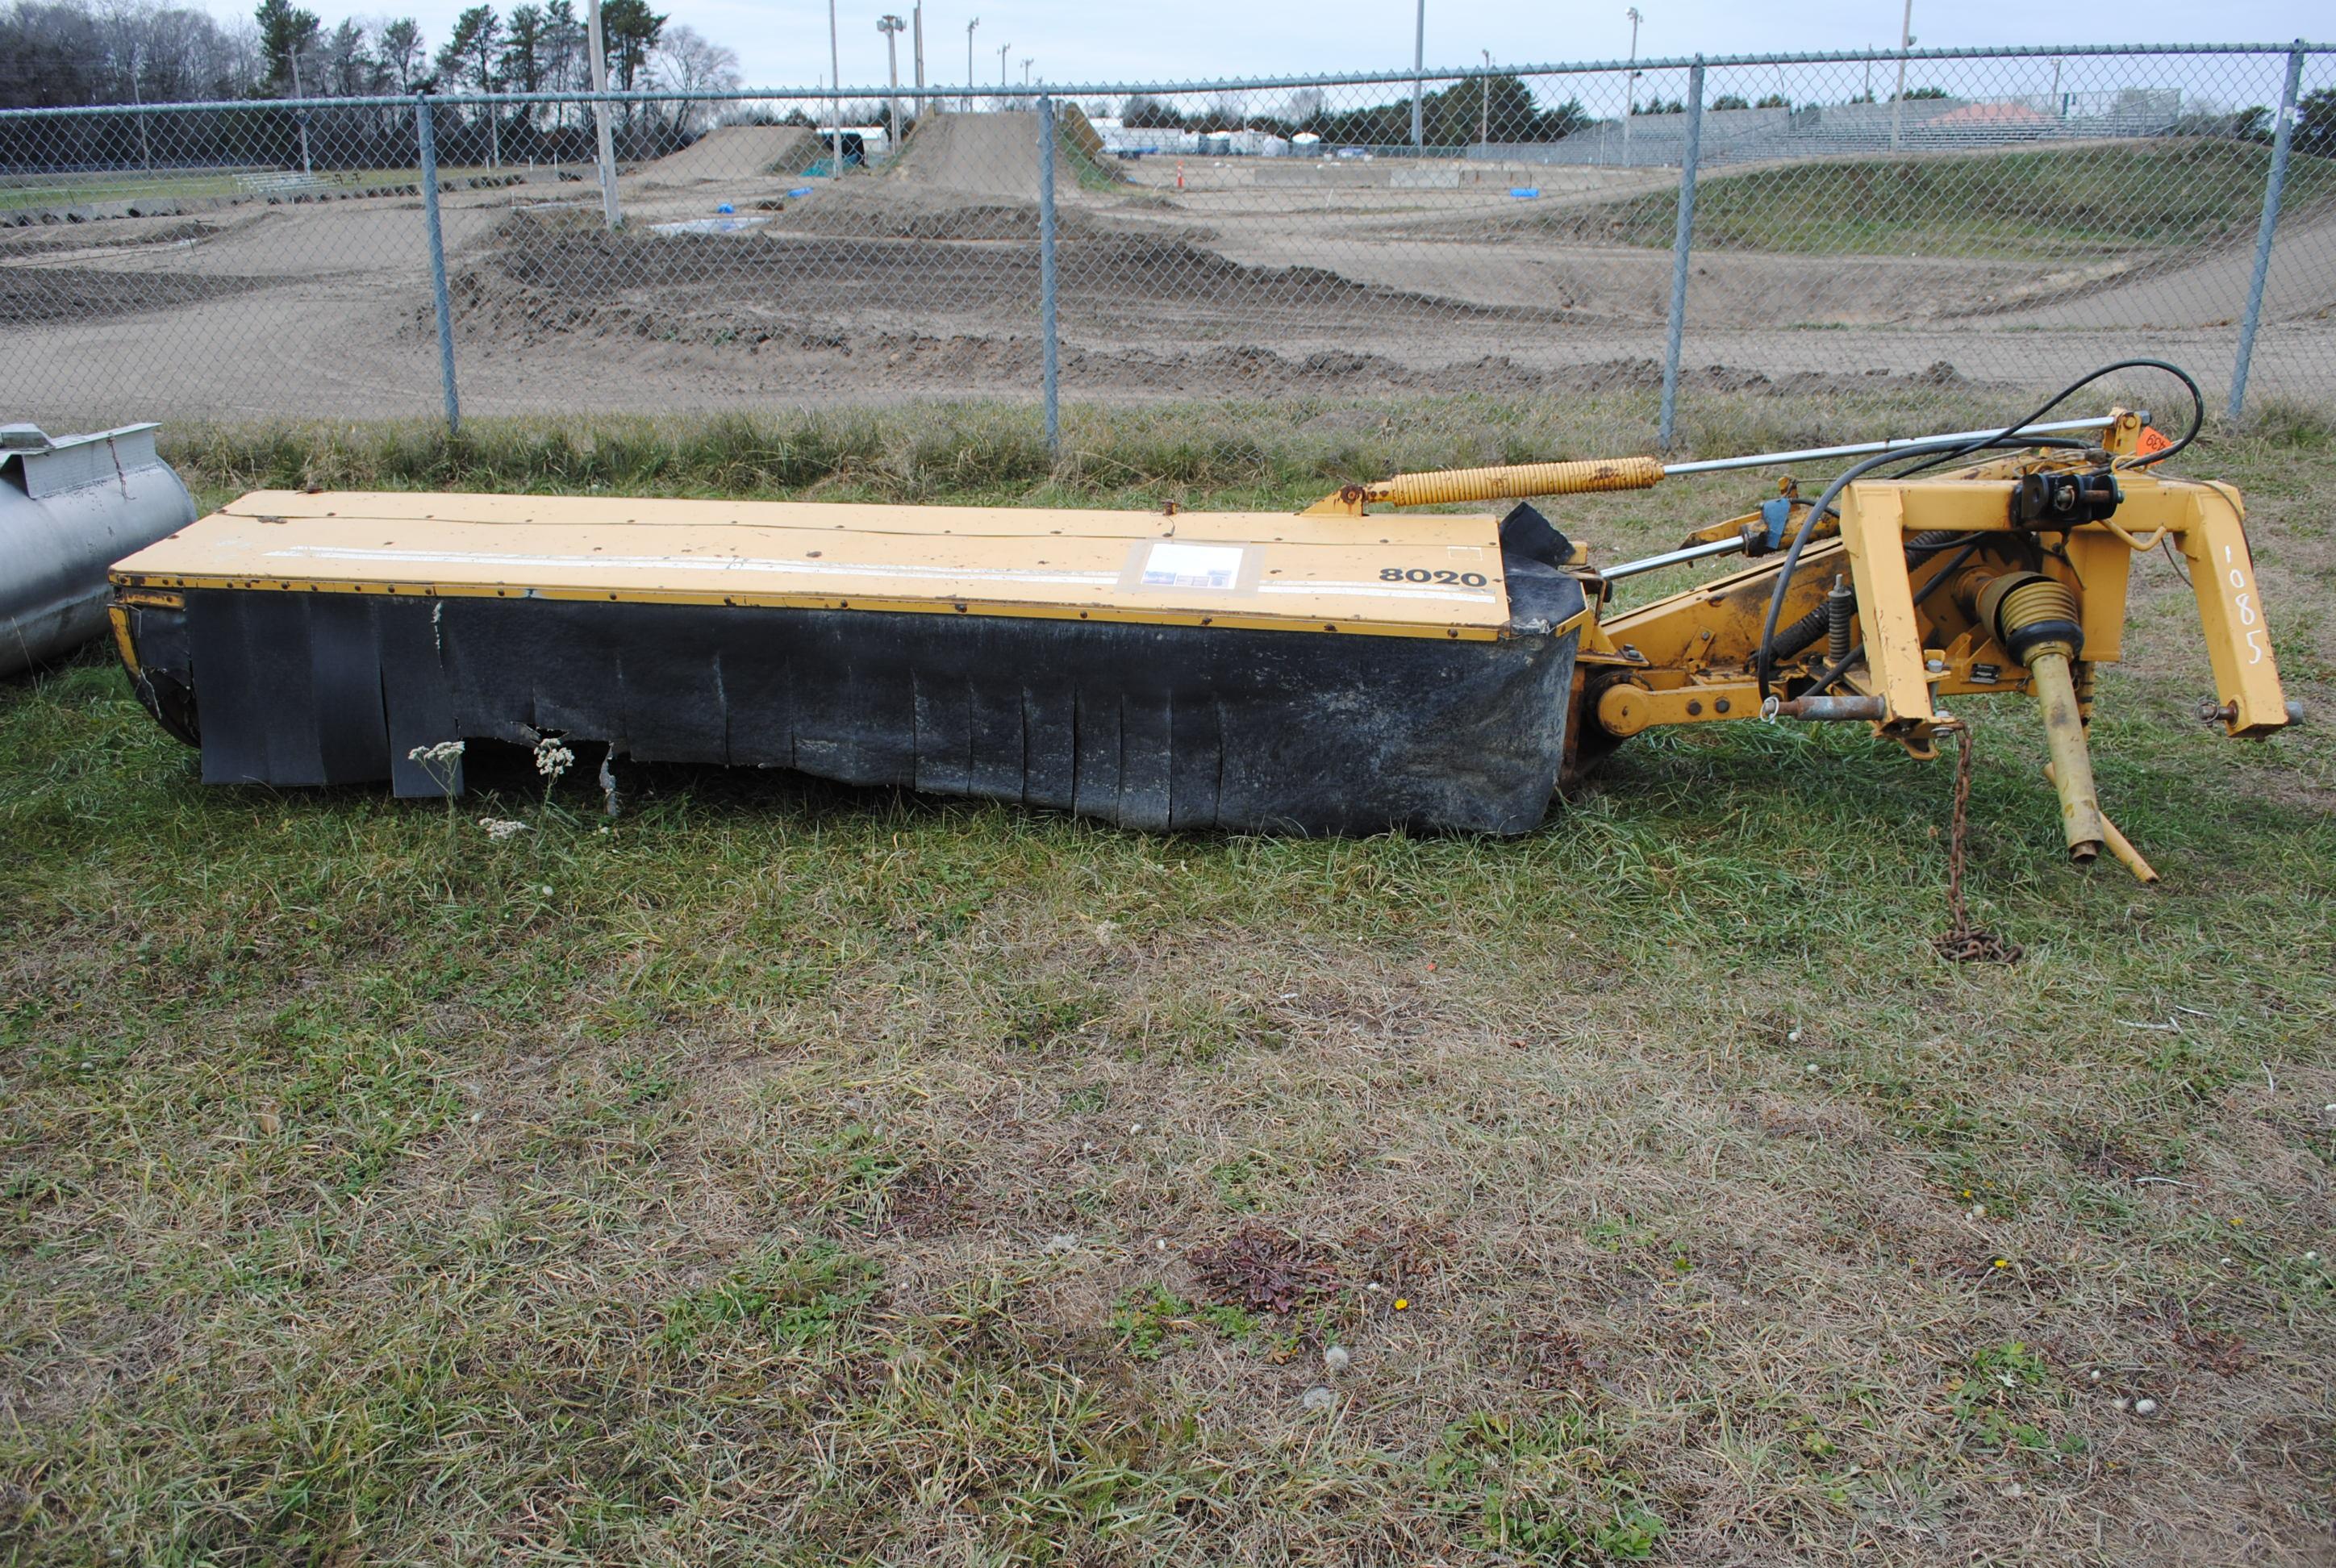 Vermeer 9' 8020 Disk Mower, owners manual & complete parts manual in office and 2 extra containers o